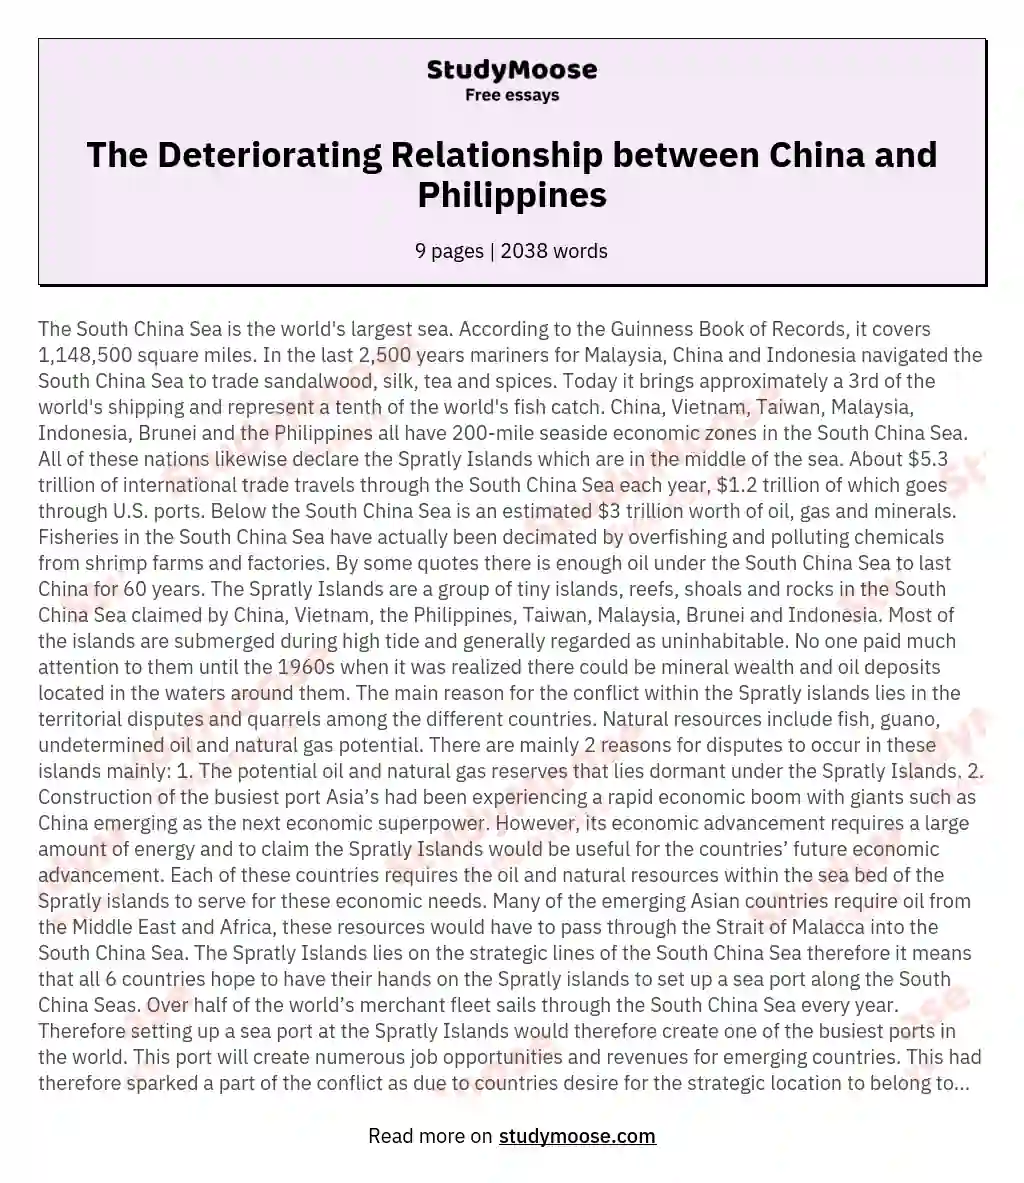 The Deteriorating Relationship between China and Philippines essay